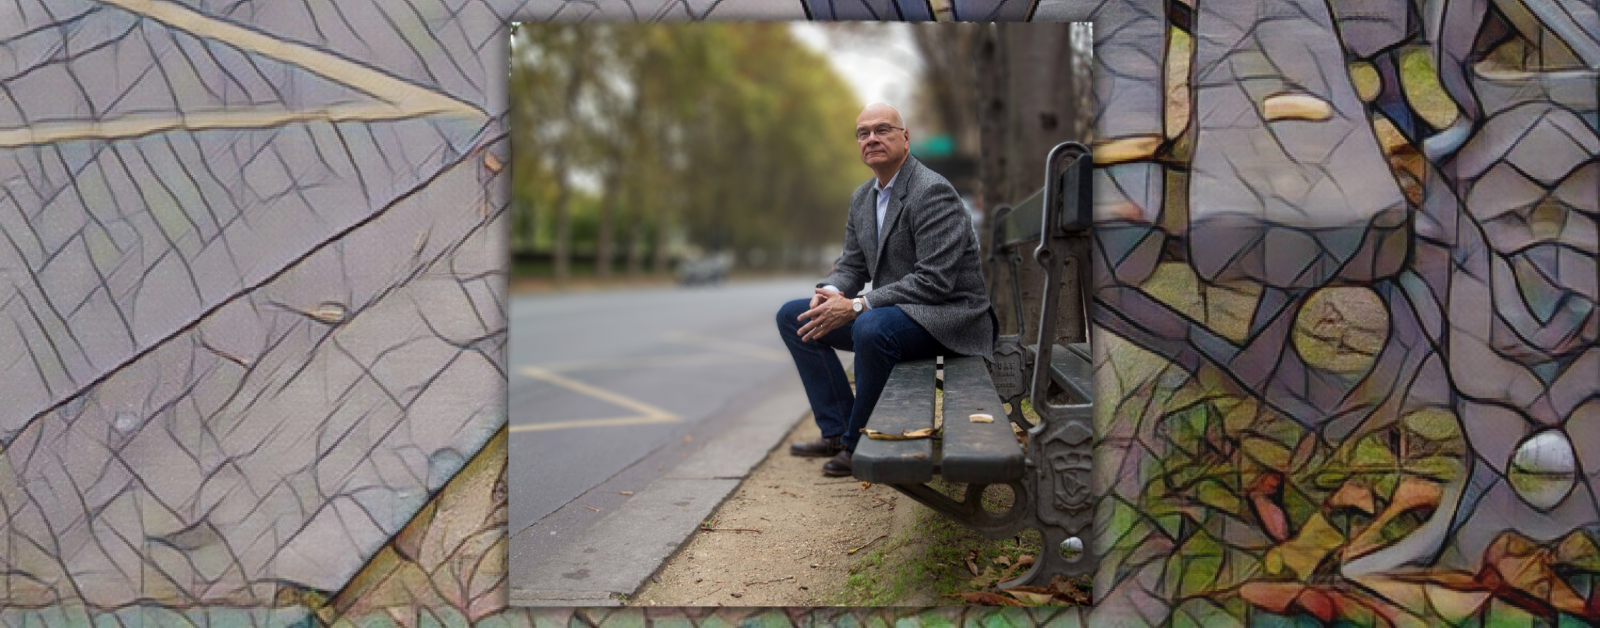 photo of Tim Keller sitting on a bench in a city